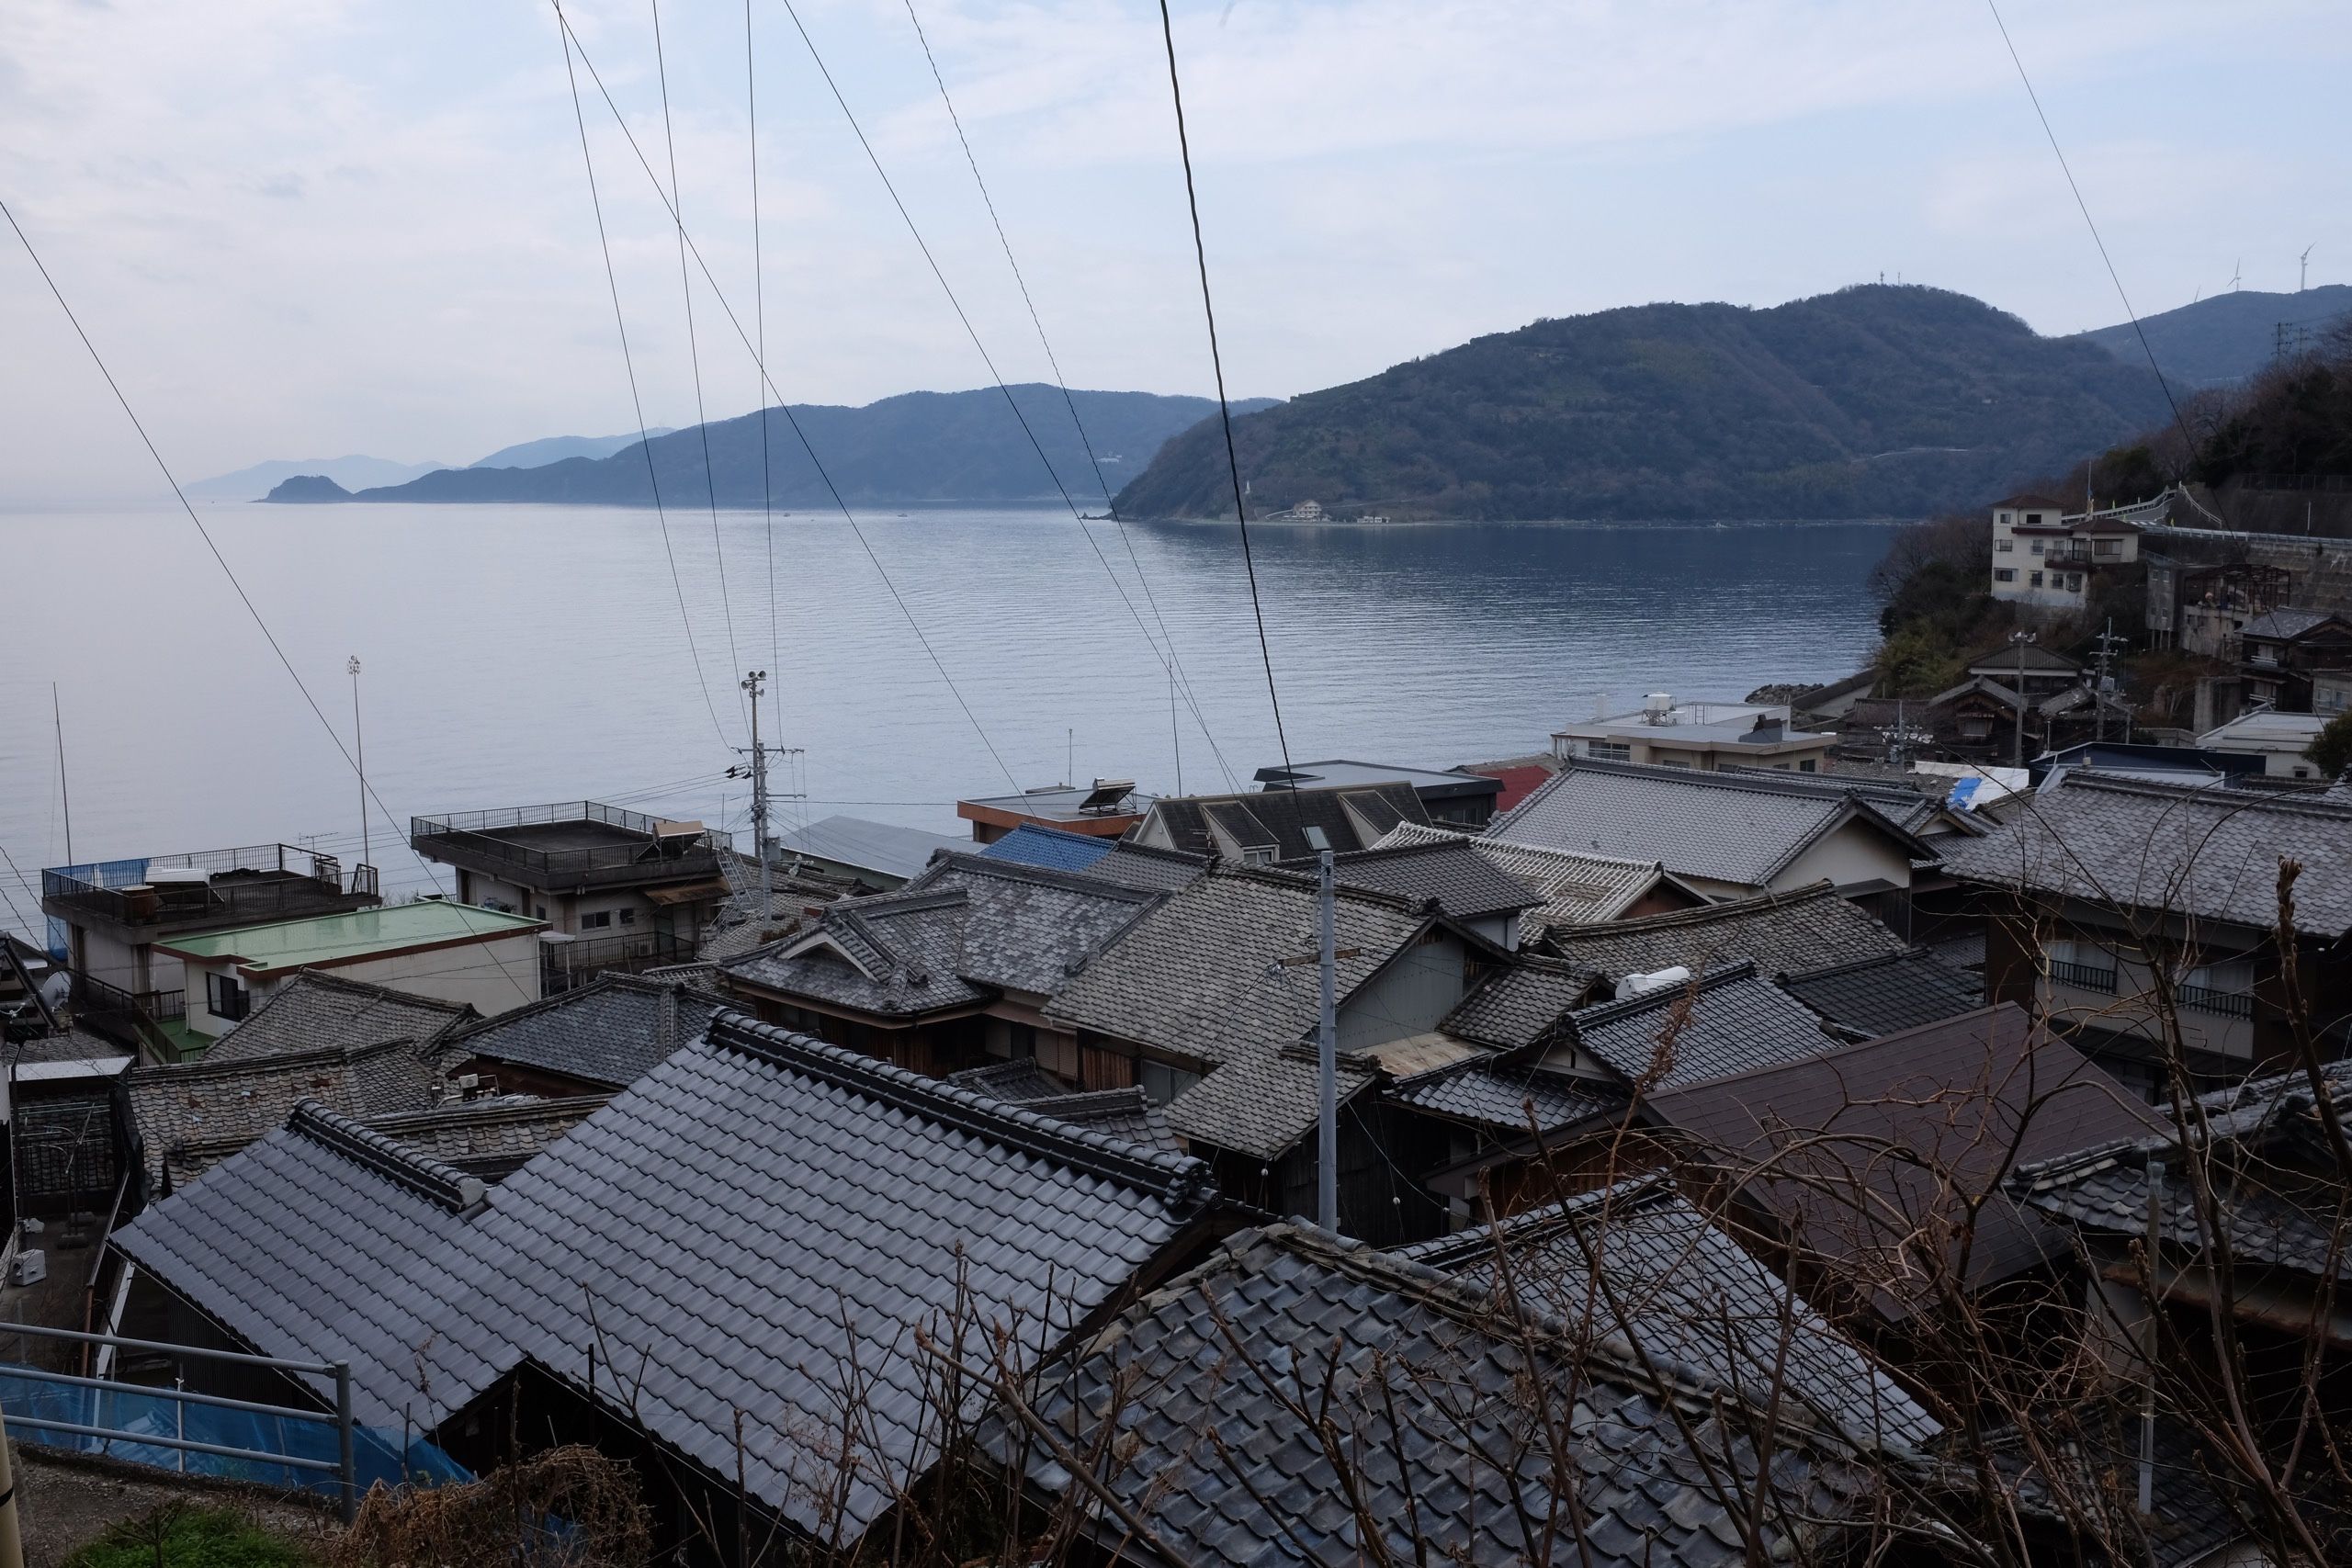 A very tight cluster of houses form a fishing village in a bay, with power lines descending almost vertically from above.